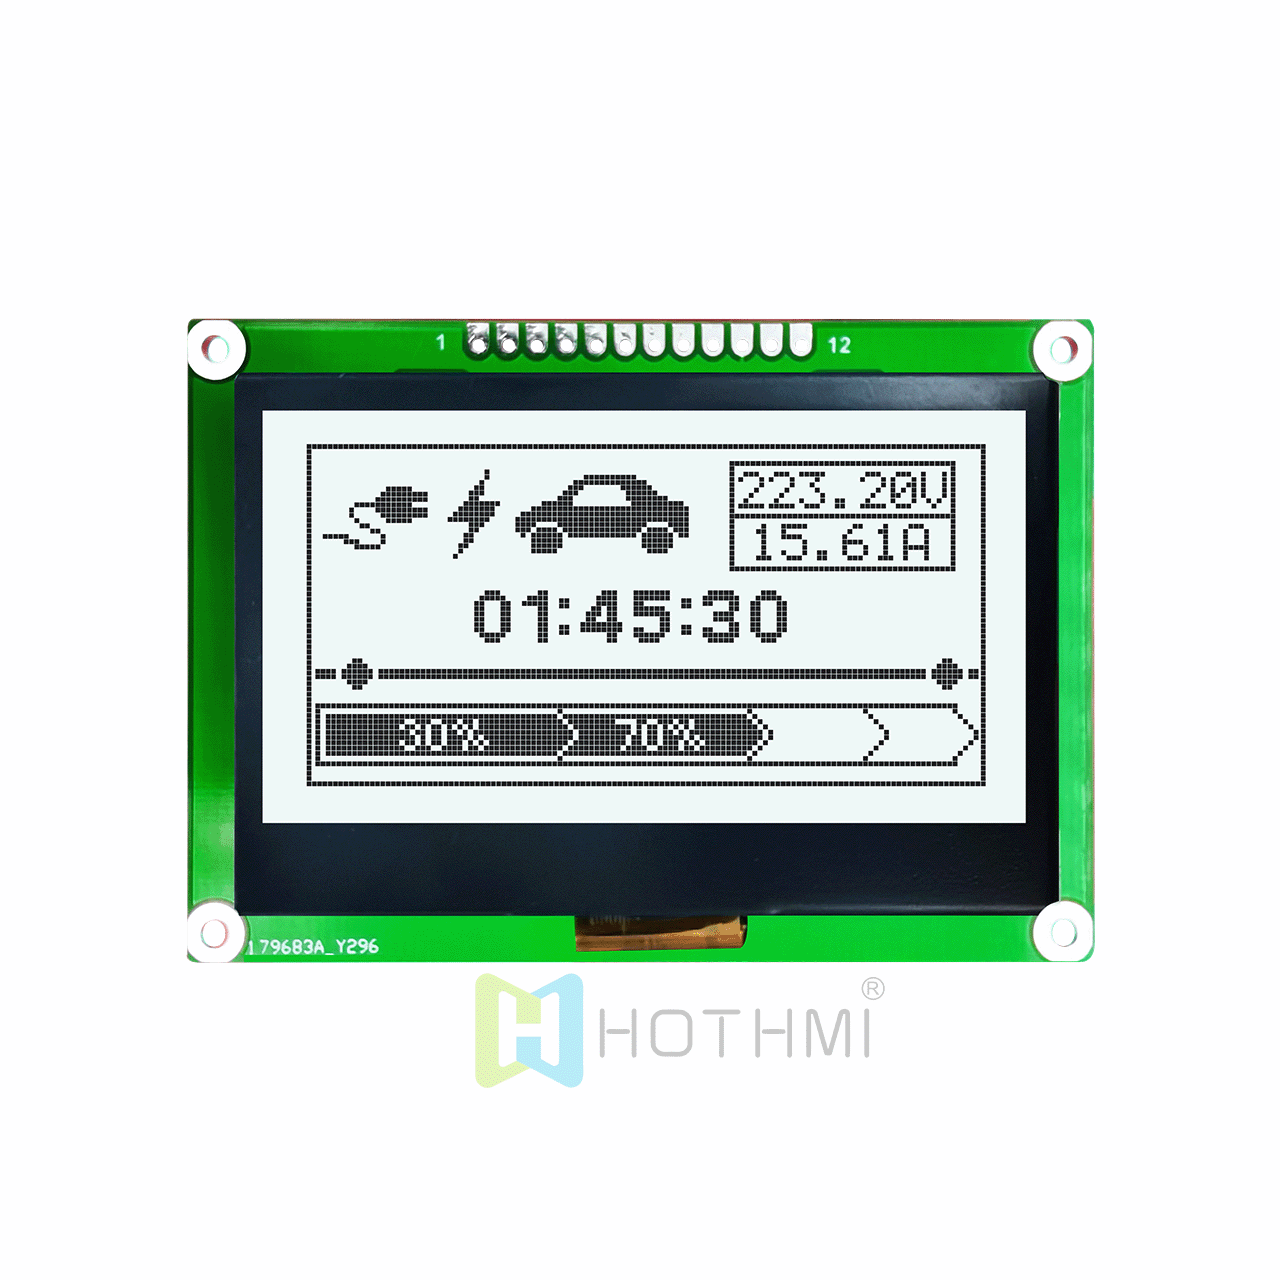 2.7-inch LCD128 x 64 graphic LCD screen/LCM128x64 graphic dot matrix module/white background gray characters/Adruino/ST7567 controller